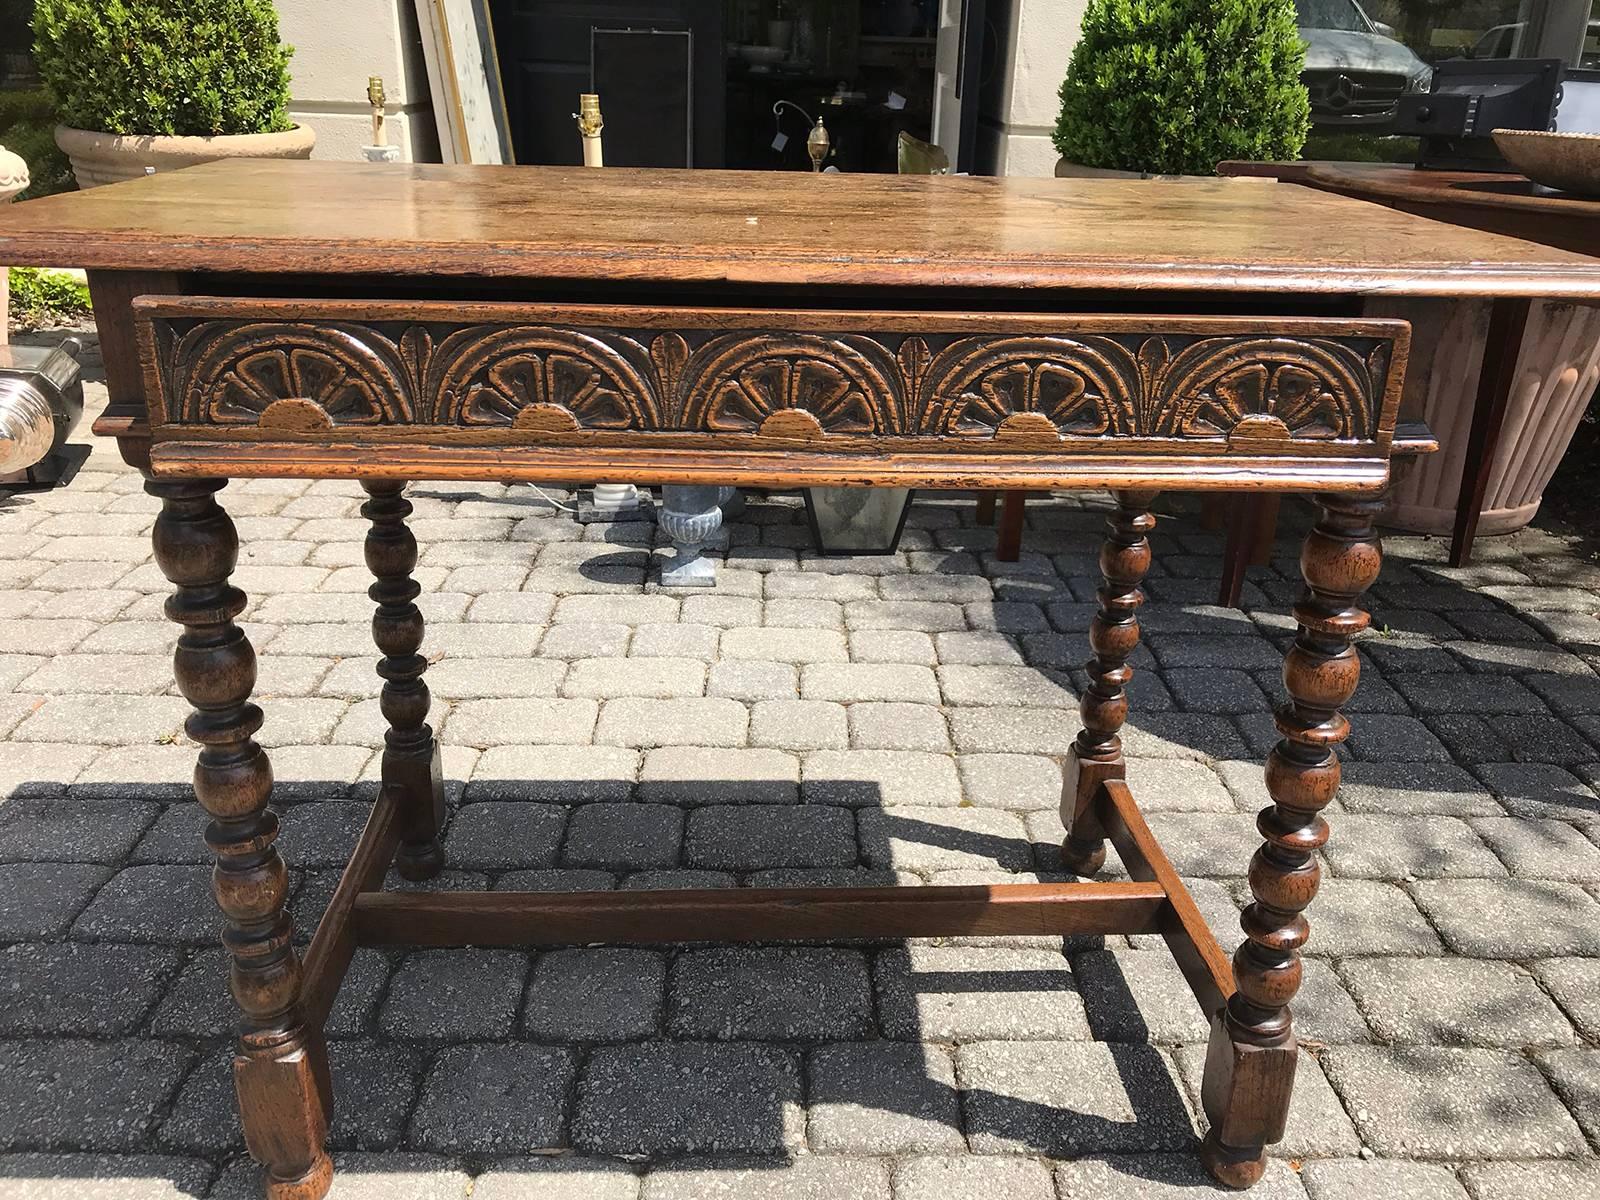 19th century English Georgian style oak writing/side table with drawers, great carving and patina.